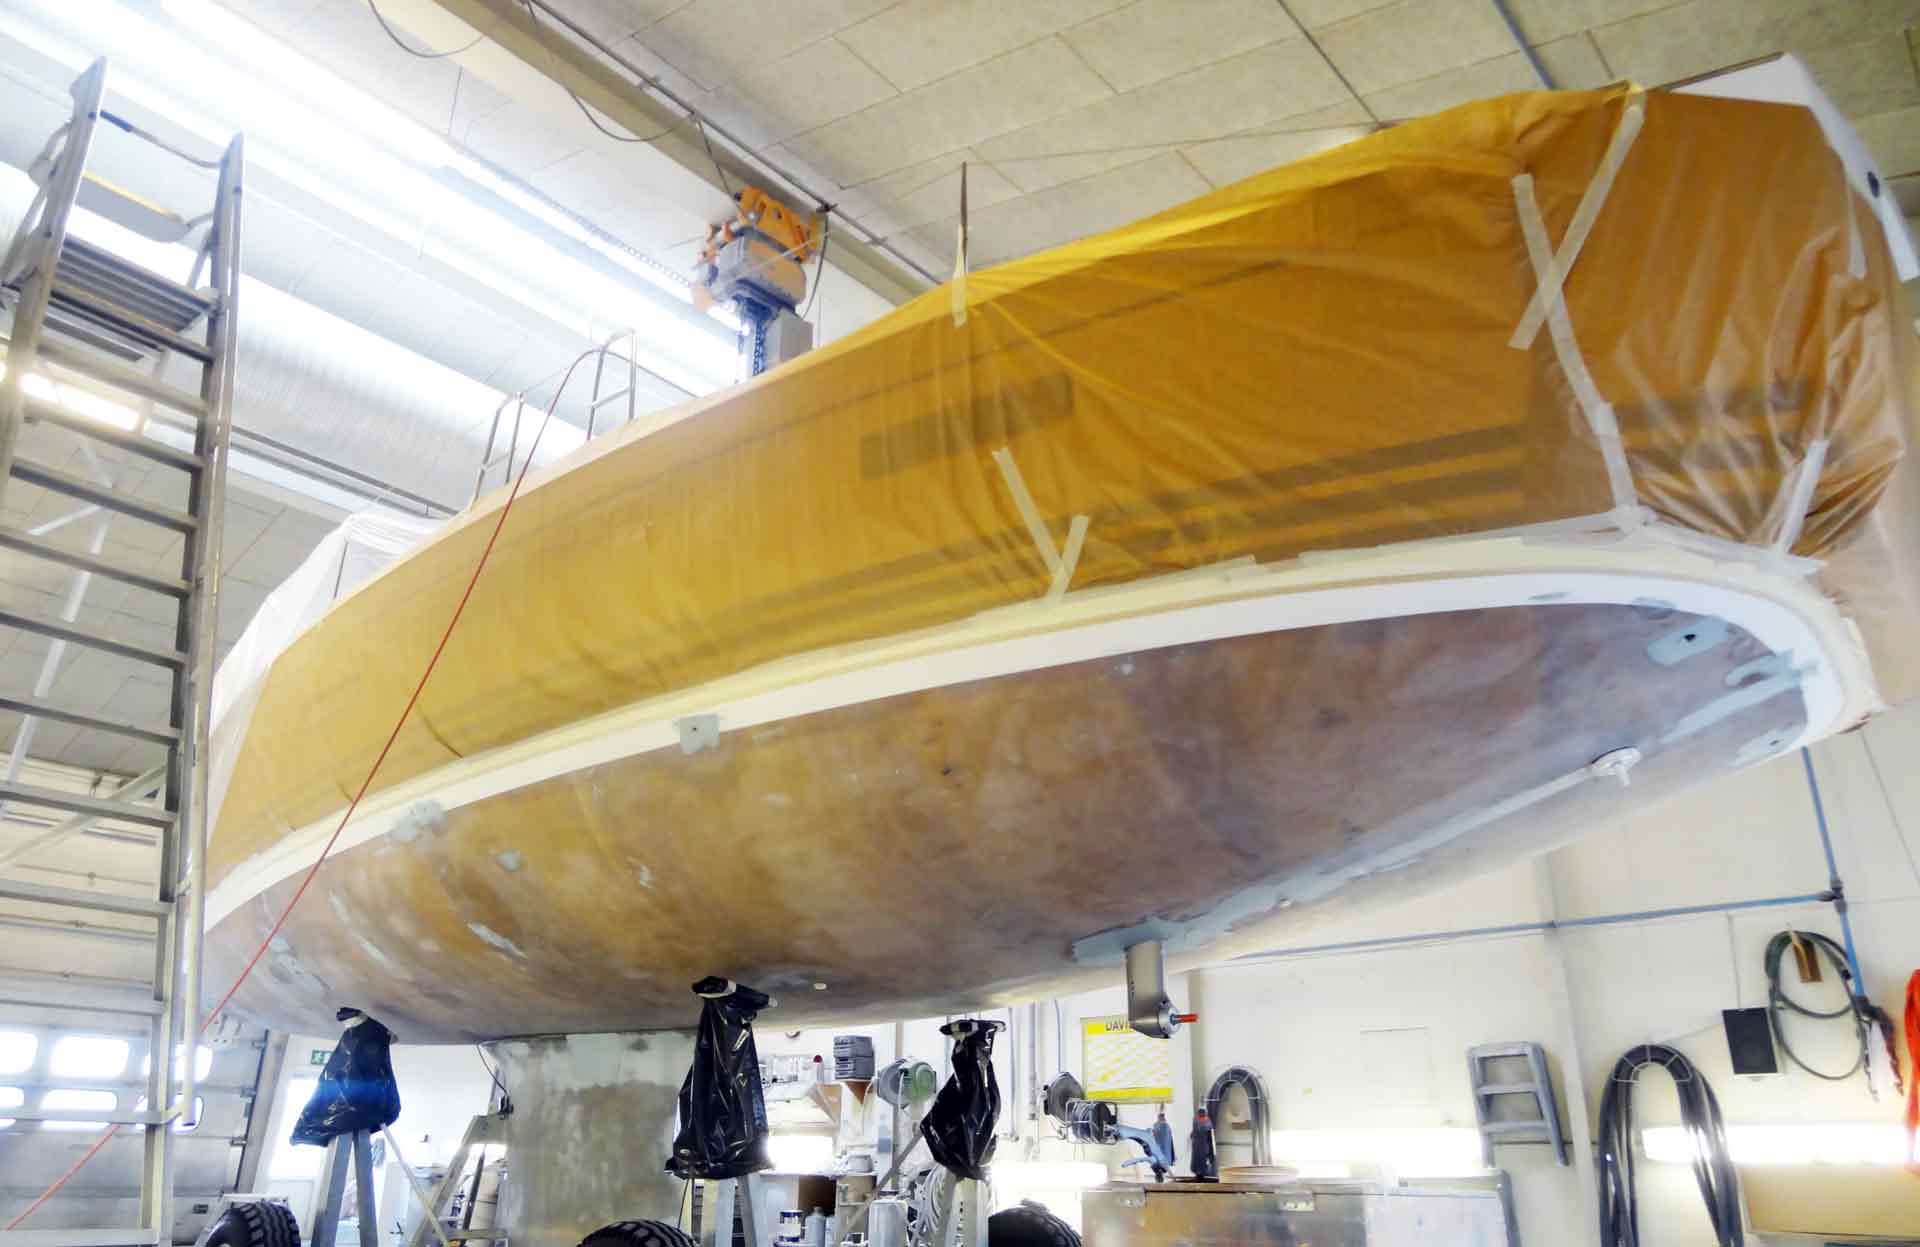 One of the Yachts in refit